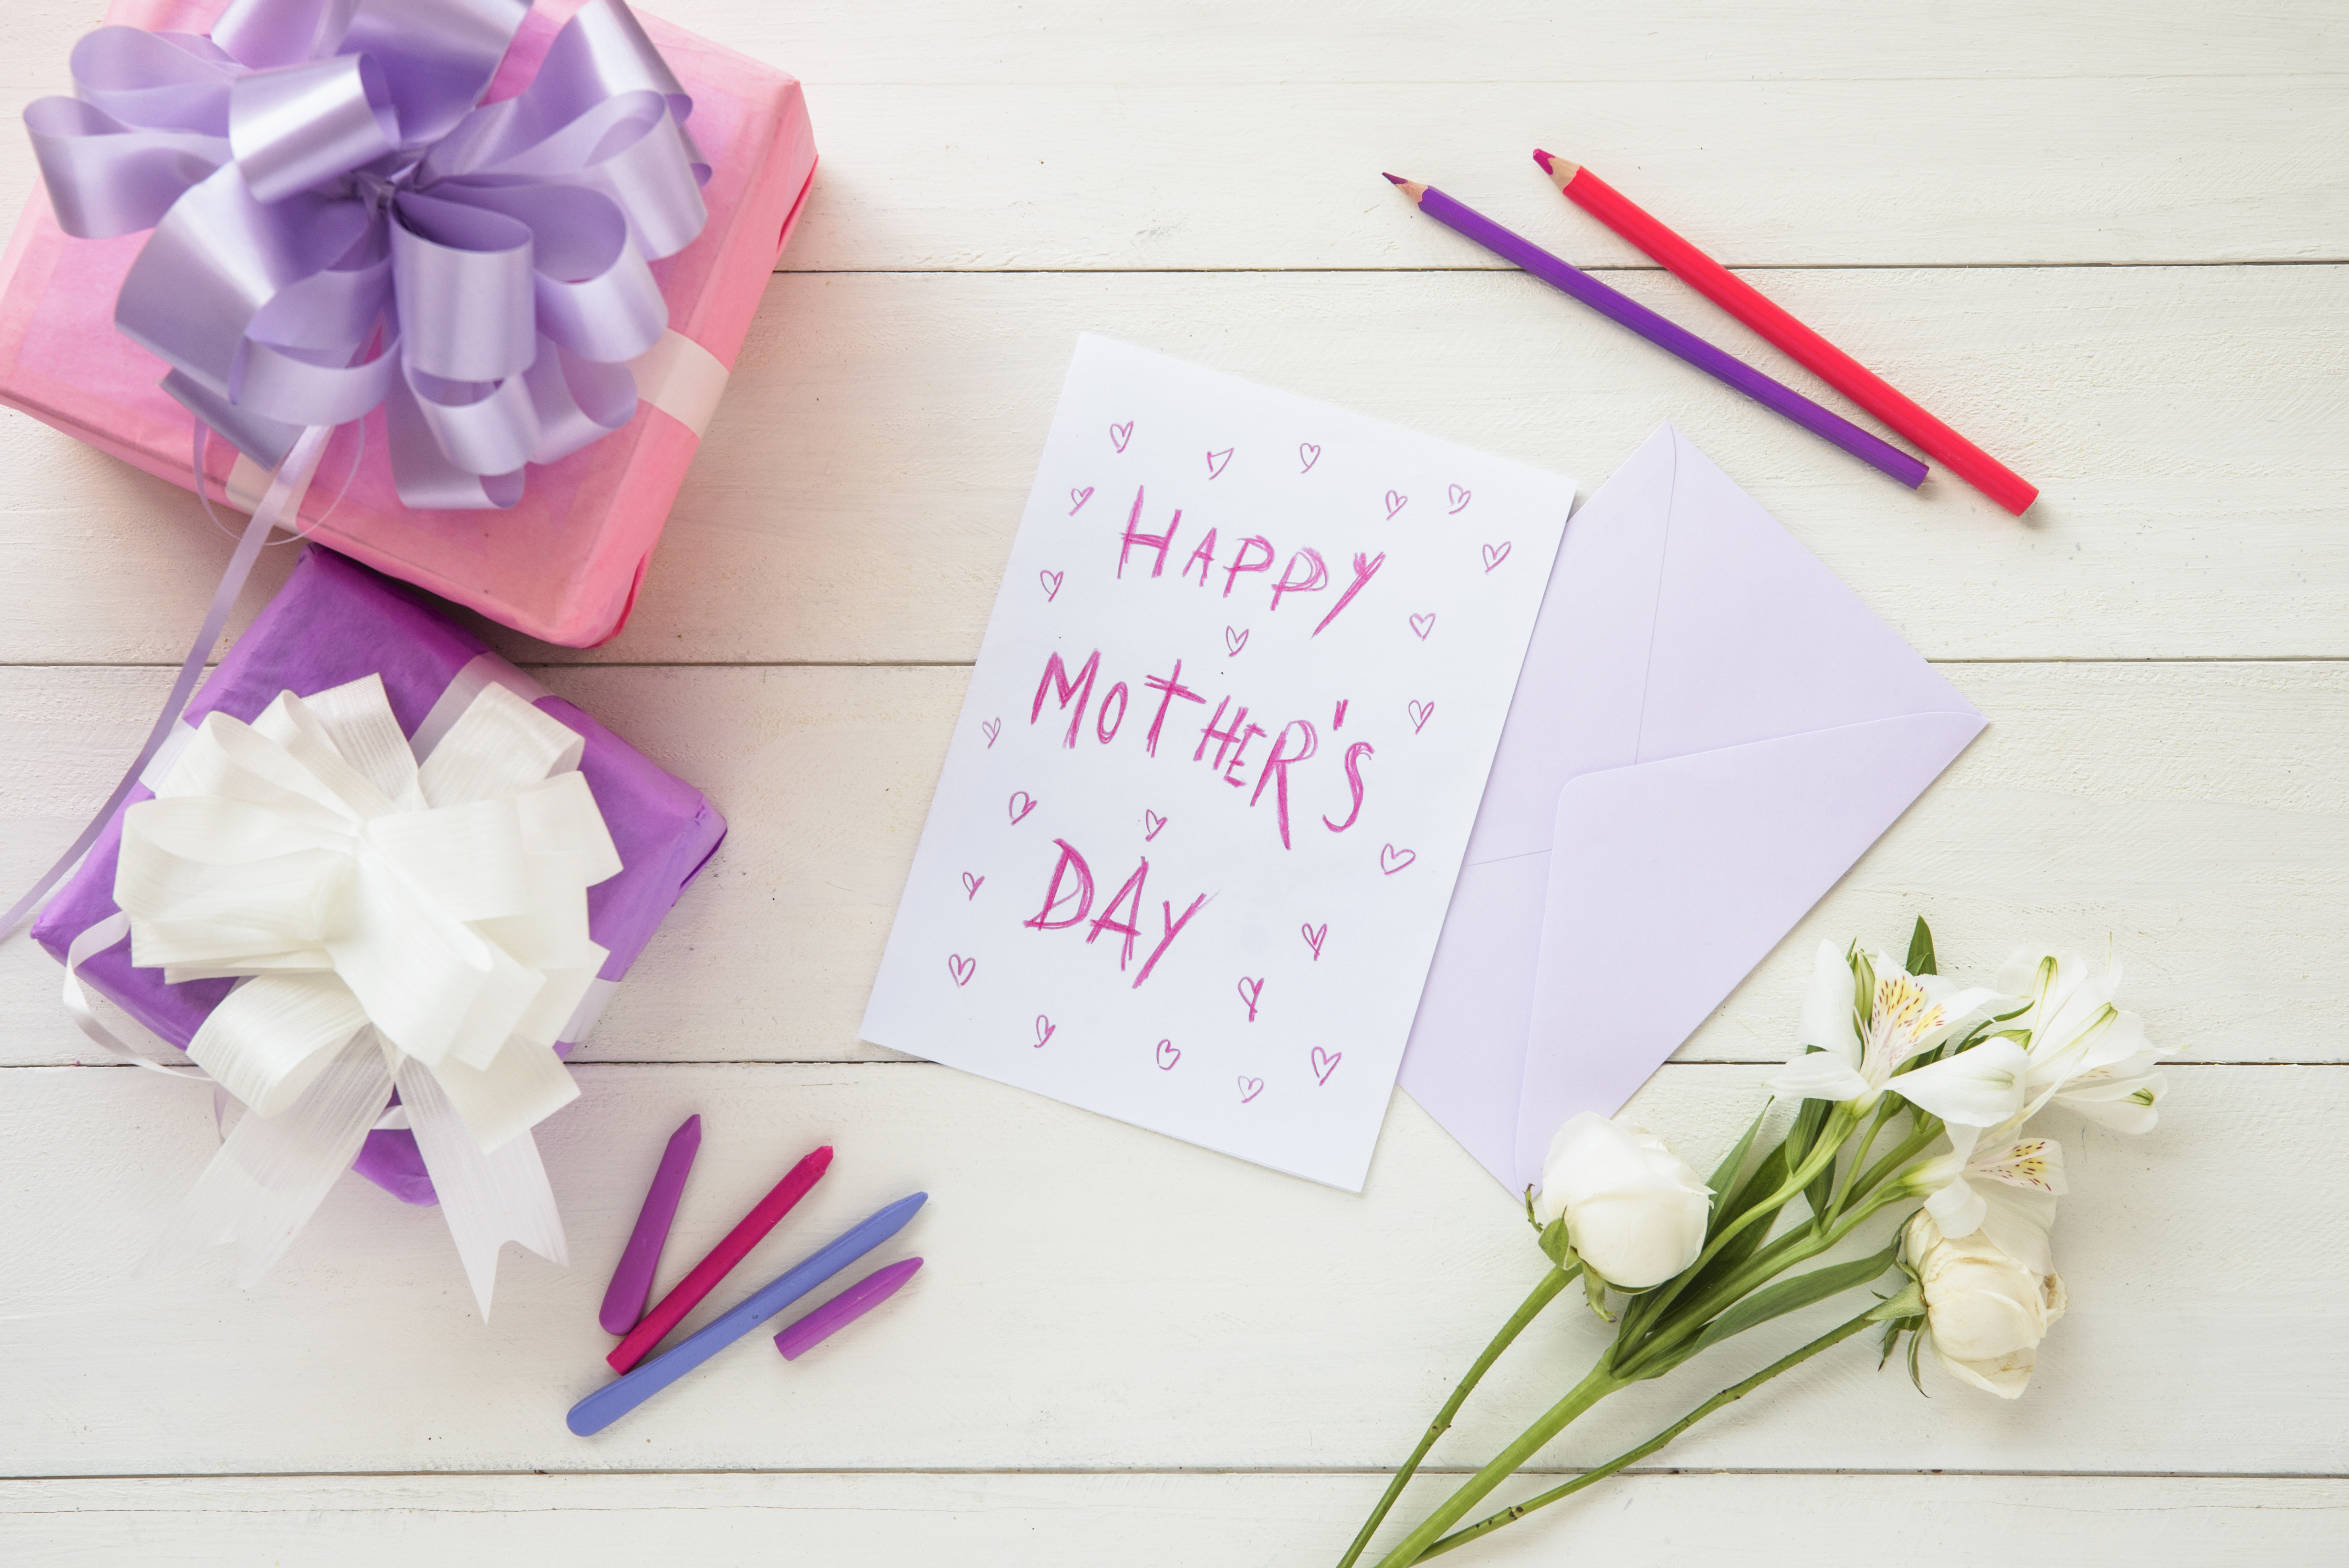 holiday, mother's day, gift, happy mother's day Full HD